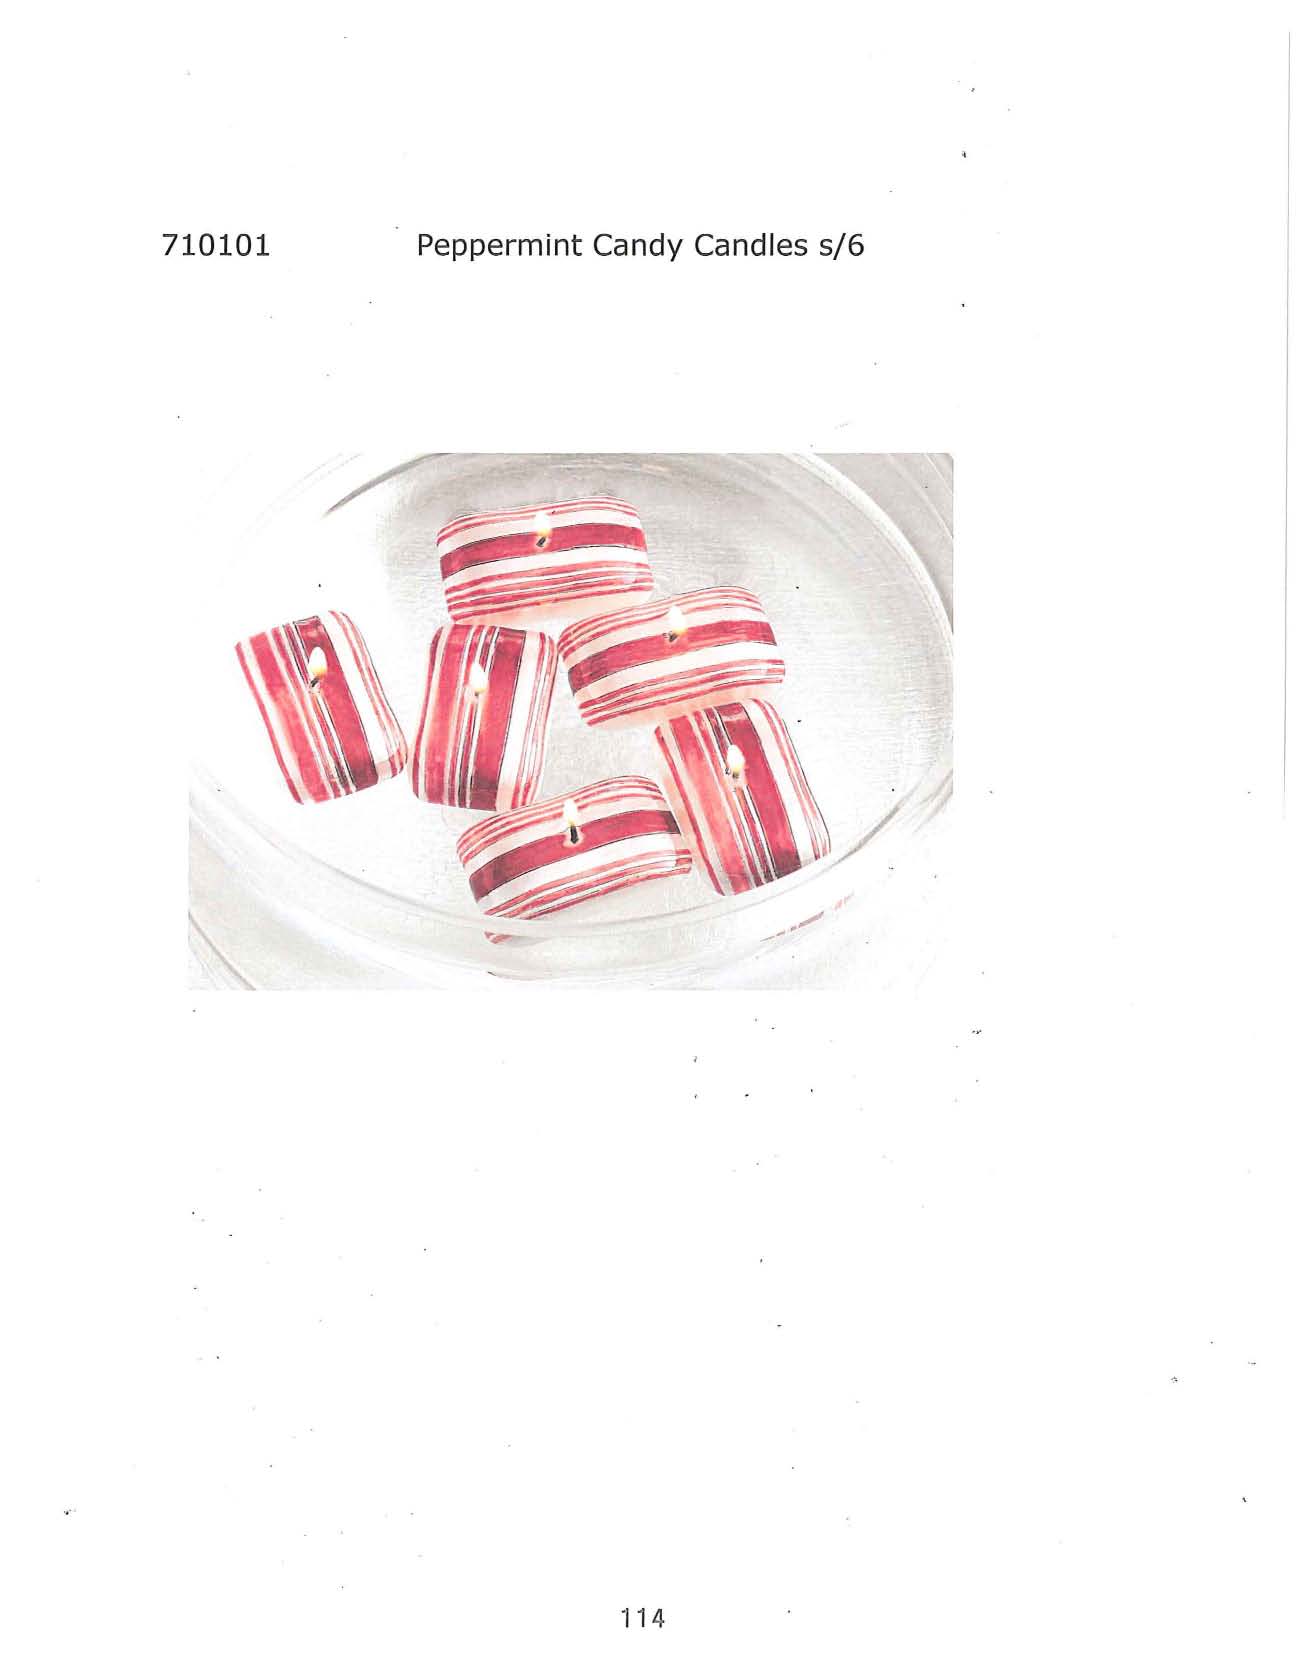 Peppermint Candy Candle s/6